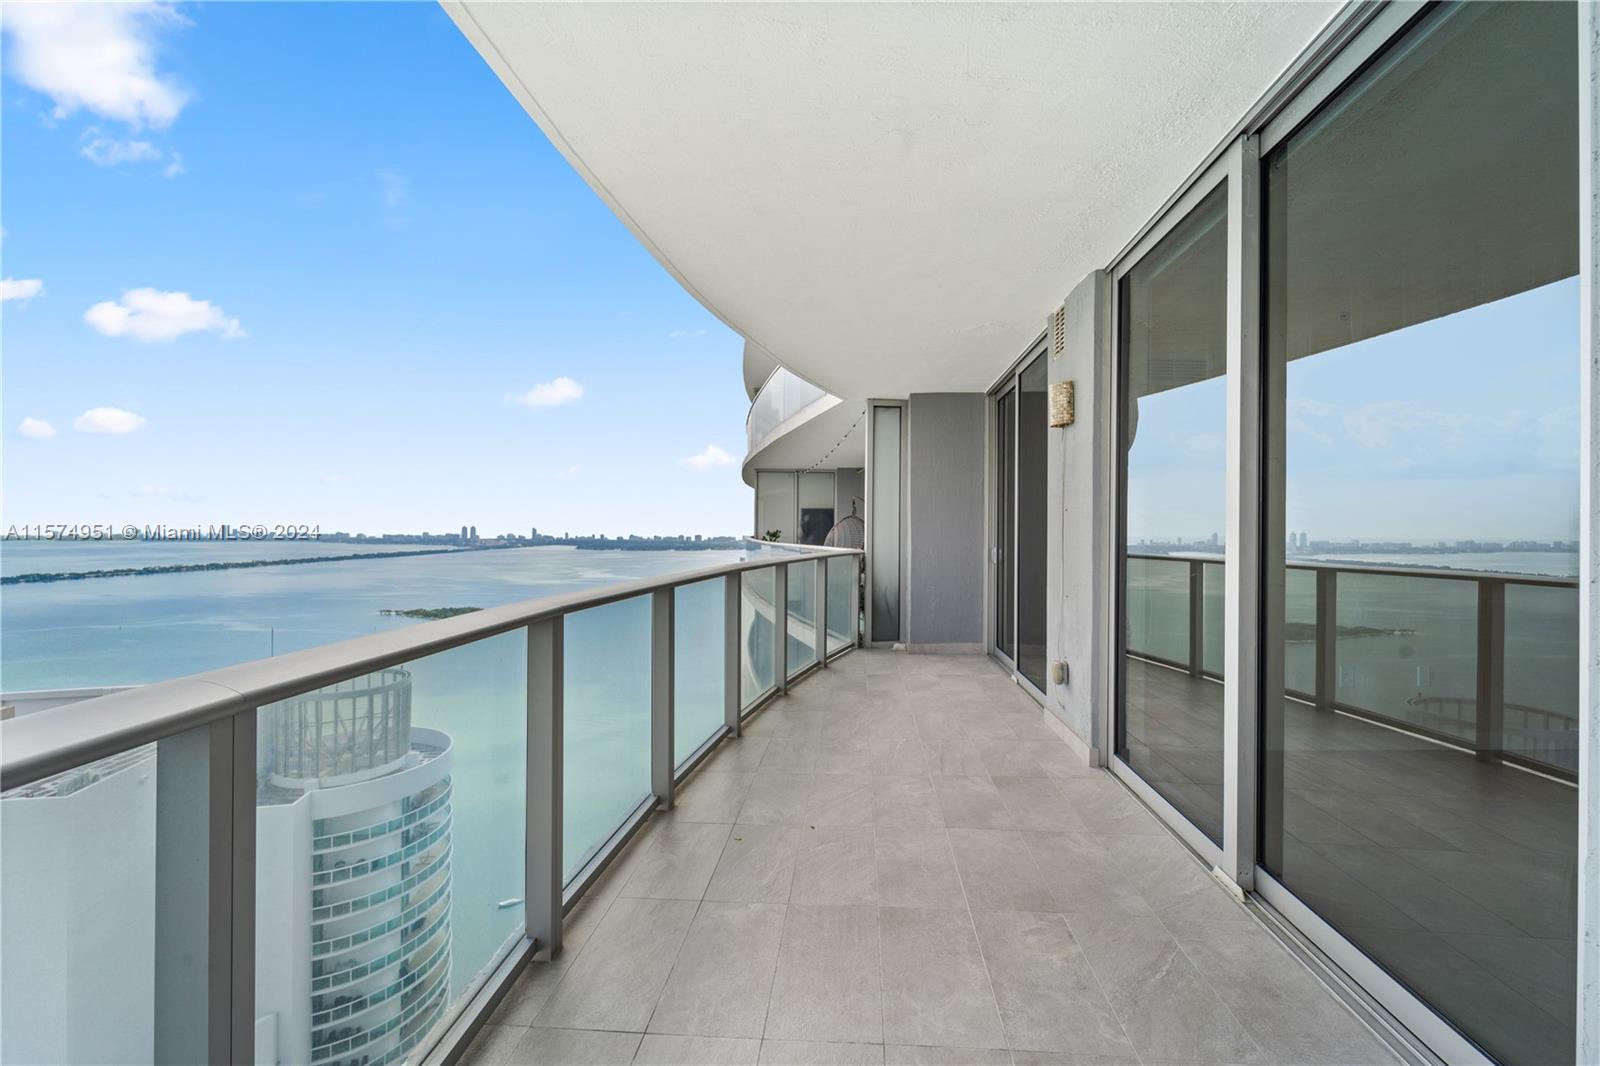 Indulge in elegant, modern living at this high-rise residence with spectacular bay views. The unit features a large open kitchen / dining room layout, an oversized balcony - great for entertaining and a spacious walk-in closet. Freshly painted interiors, ready to move in. Enjoy waterfront living with excellent amenities including a gym, pool, spa, and more. Valet parking and a doorman provide convenience and security. Easy to show.